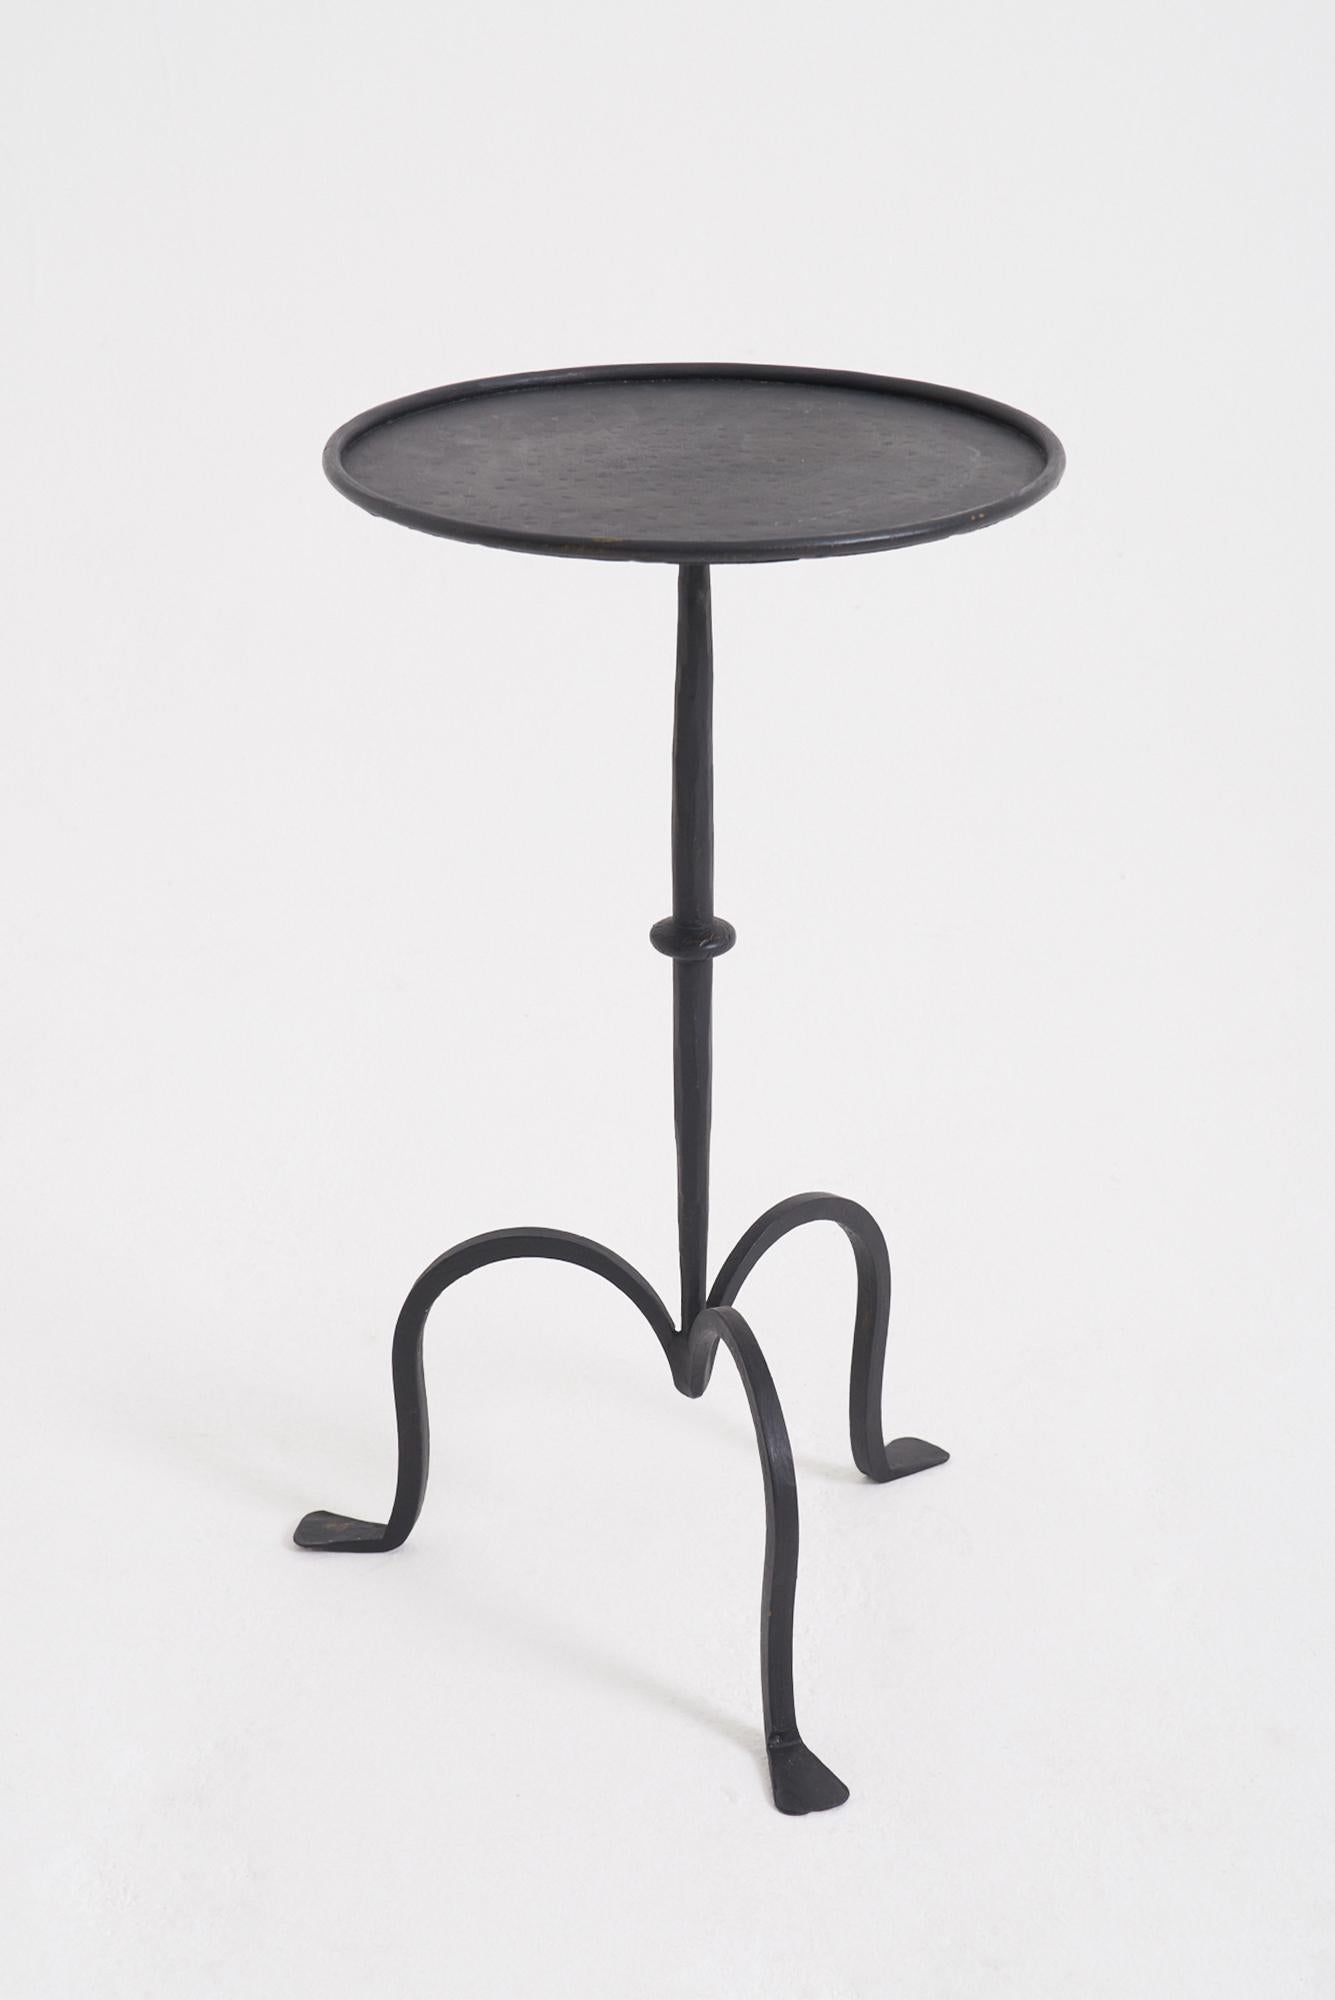 A black patinated wrought iron martini table
Spain, third quarter of the 20th Century
54.5 cm high by 31 cm diameter